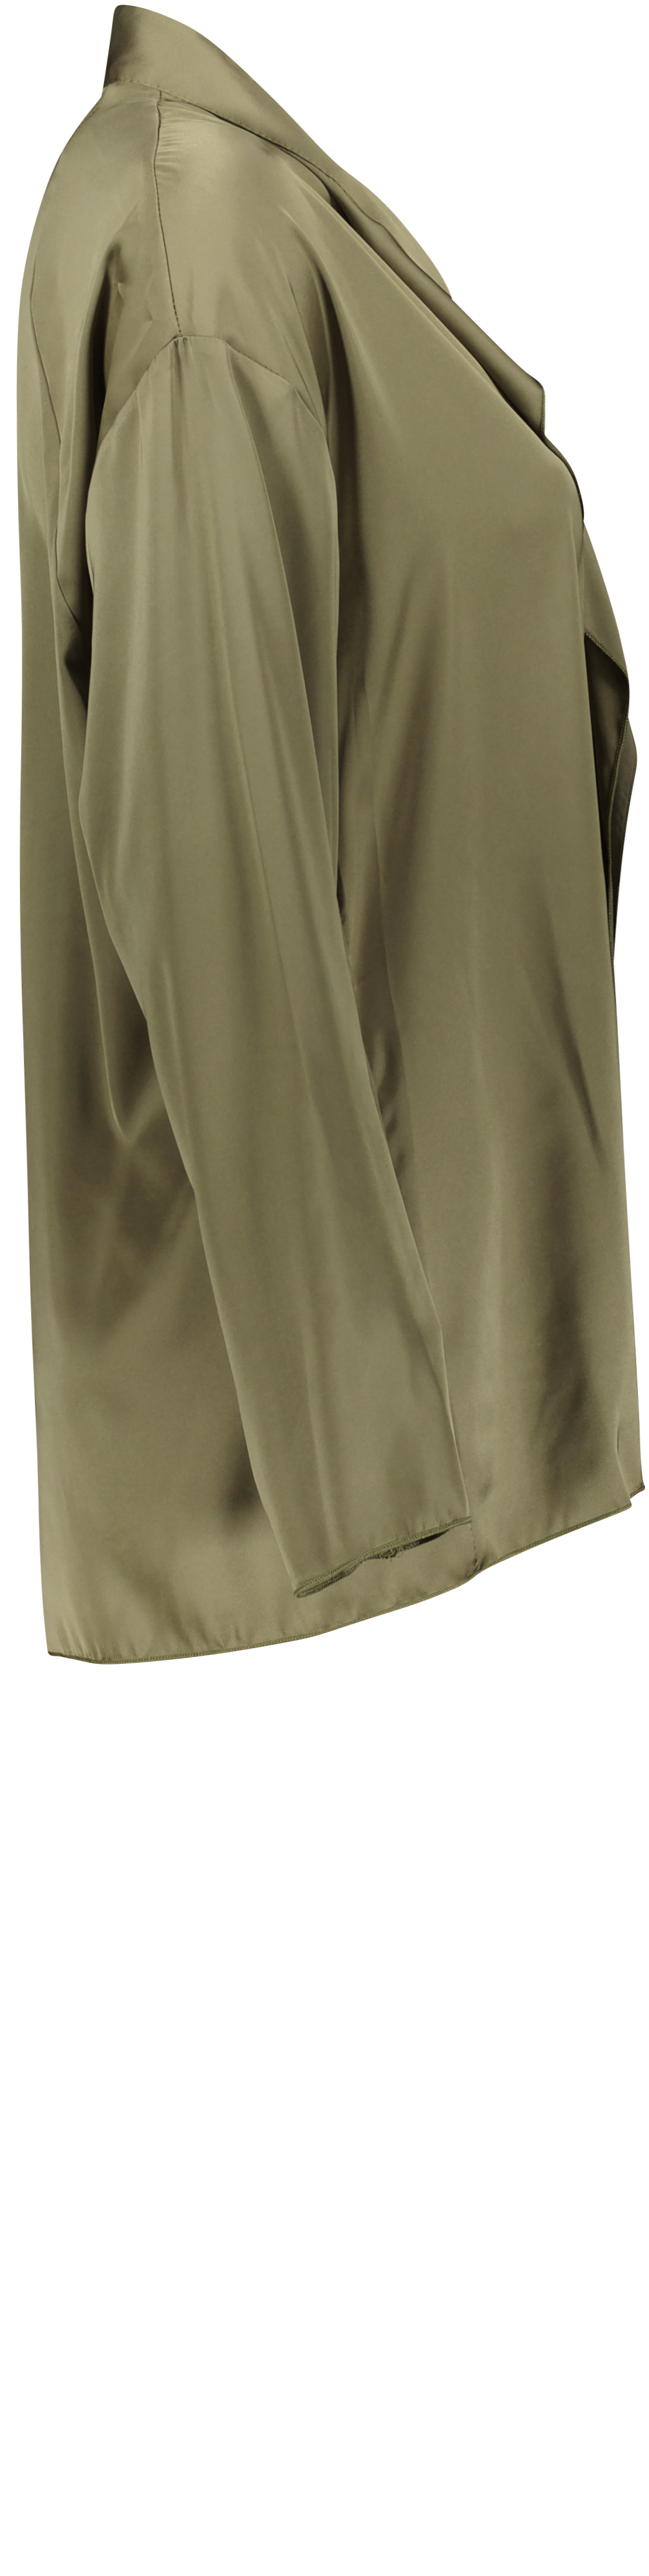 Blouse CLN3GDG 1737 Army